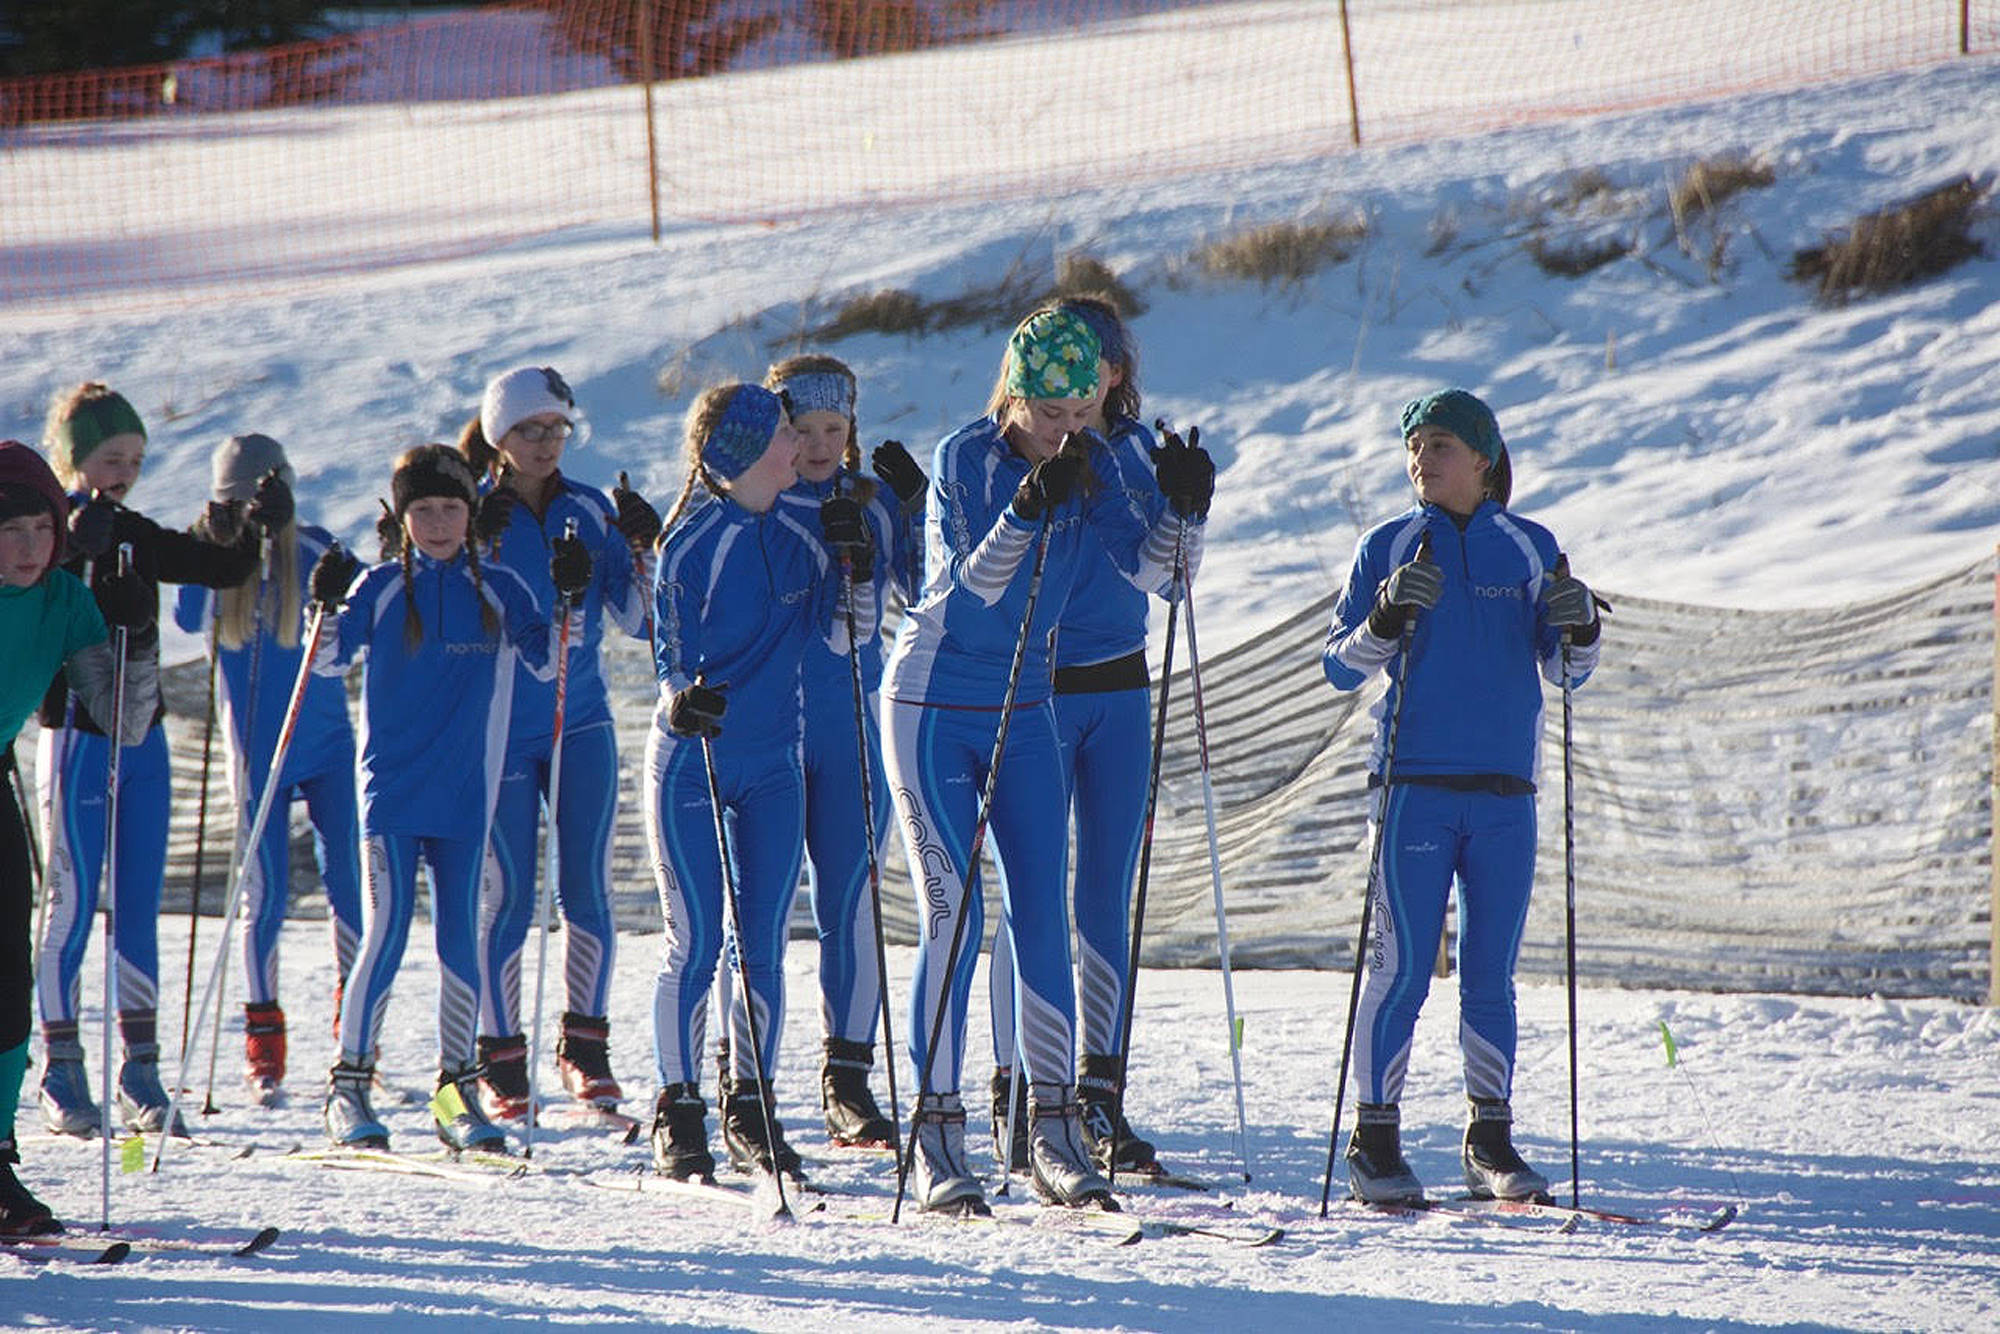 The Homer Middle School girls’ cross-country ski team prepares for a race Friday, Feb. 16, 2018 at the Lookout Mountain Ski Trails near Homer, Alaska. (Photo submitted)